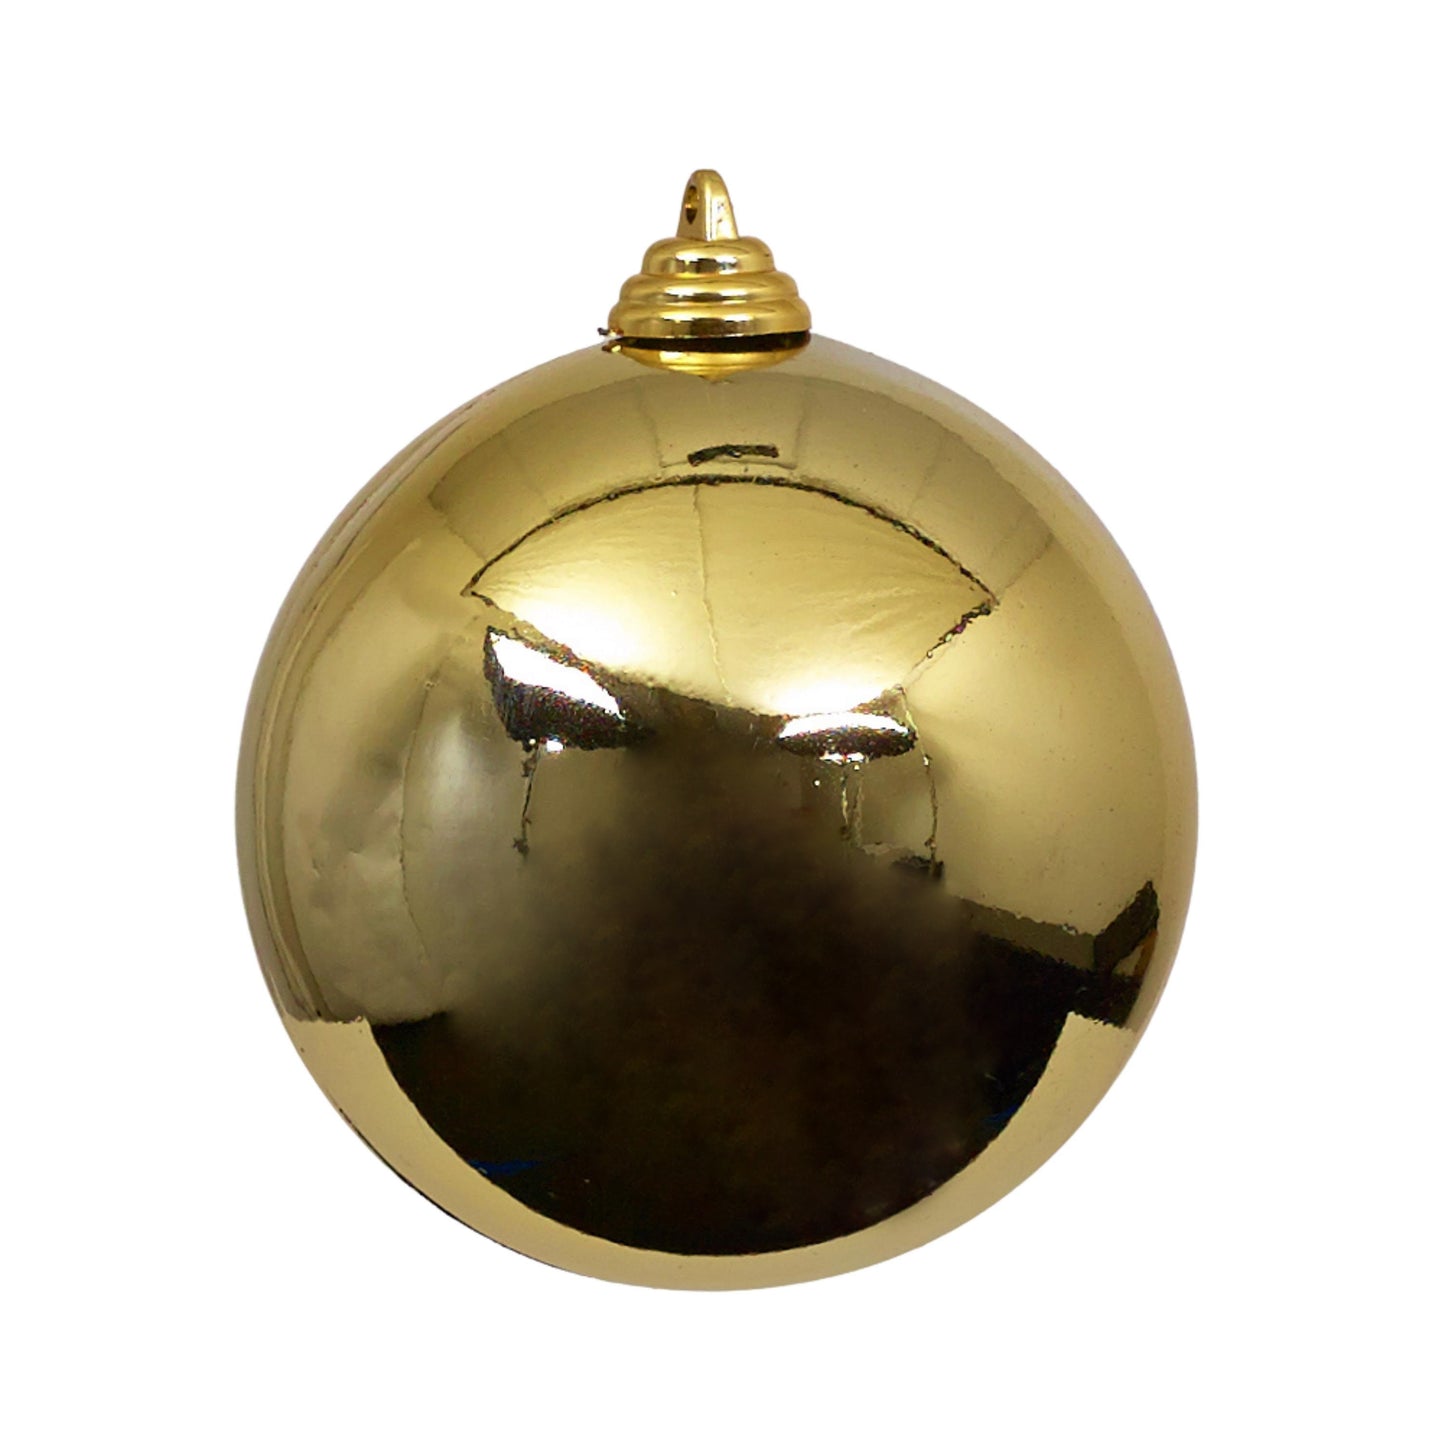 Gold Shiny Ornament 3" - Pack of 12